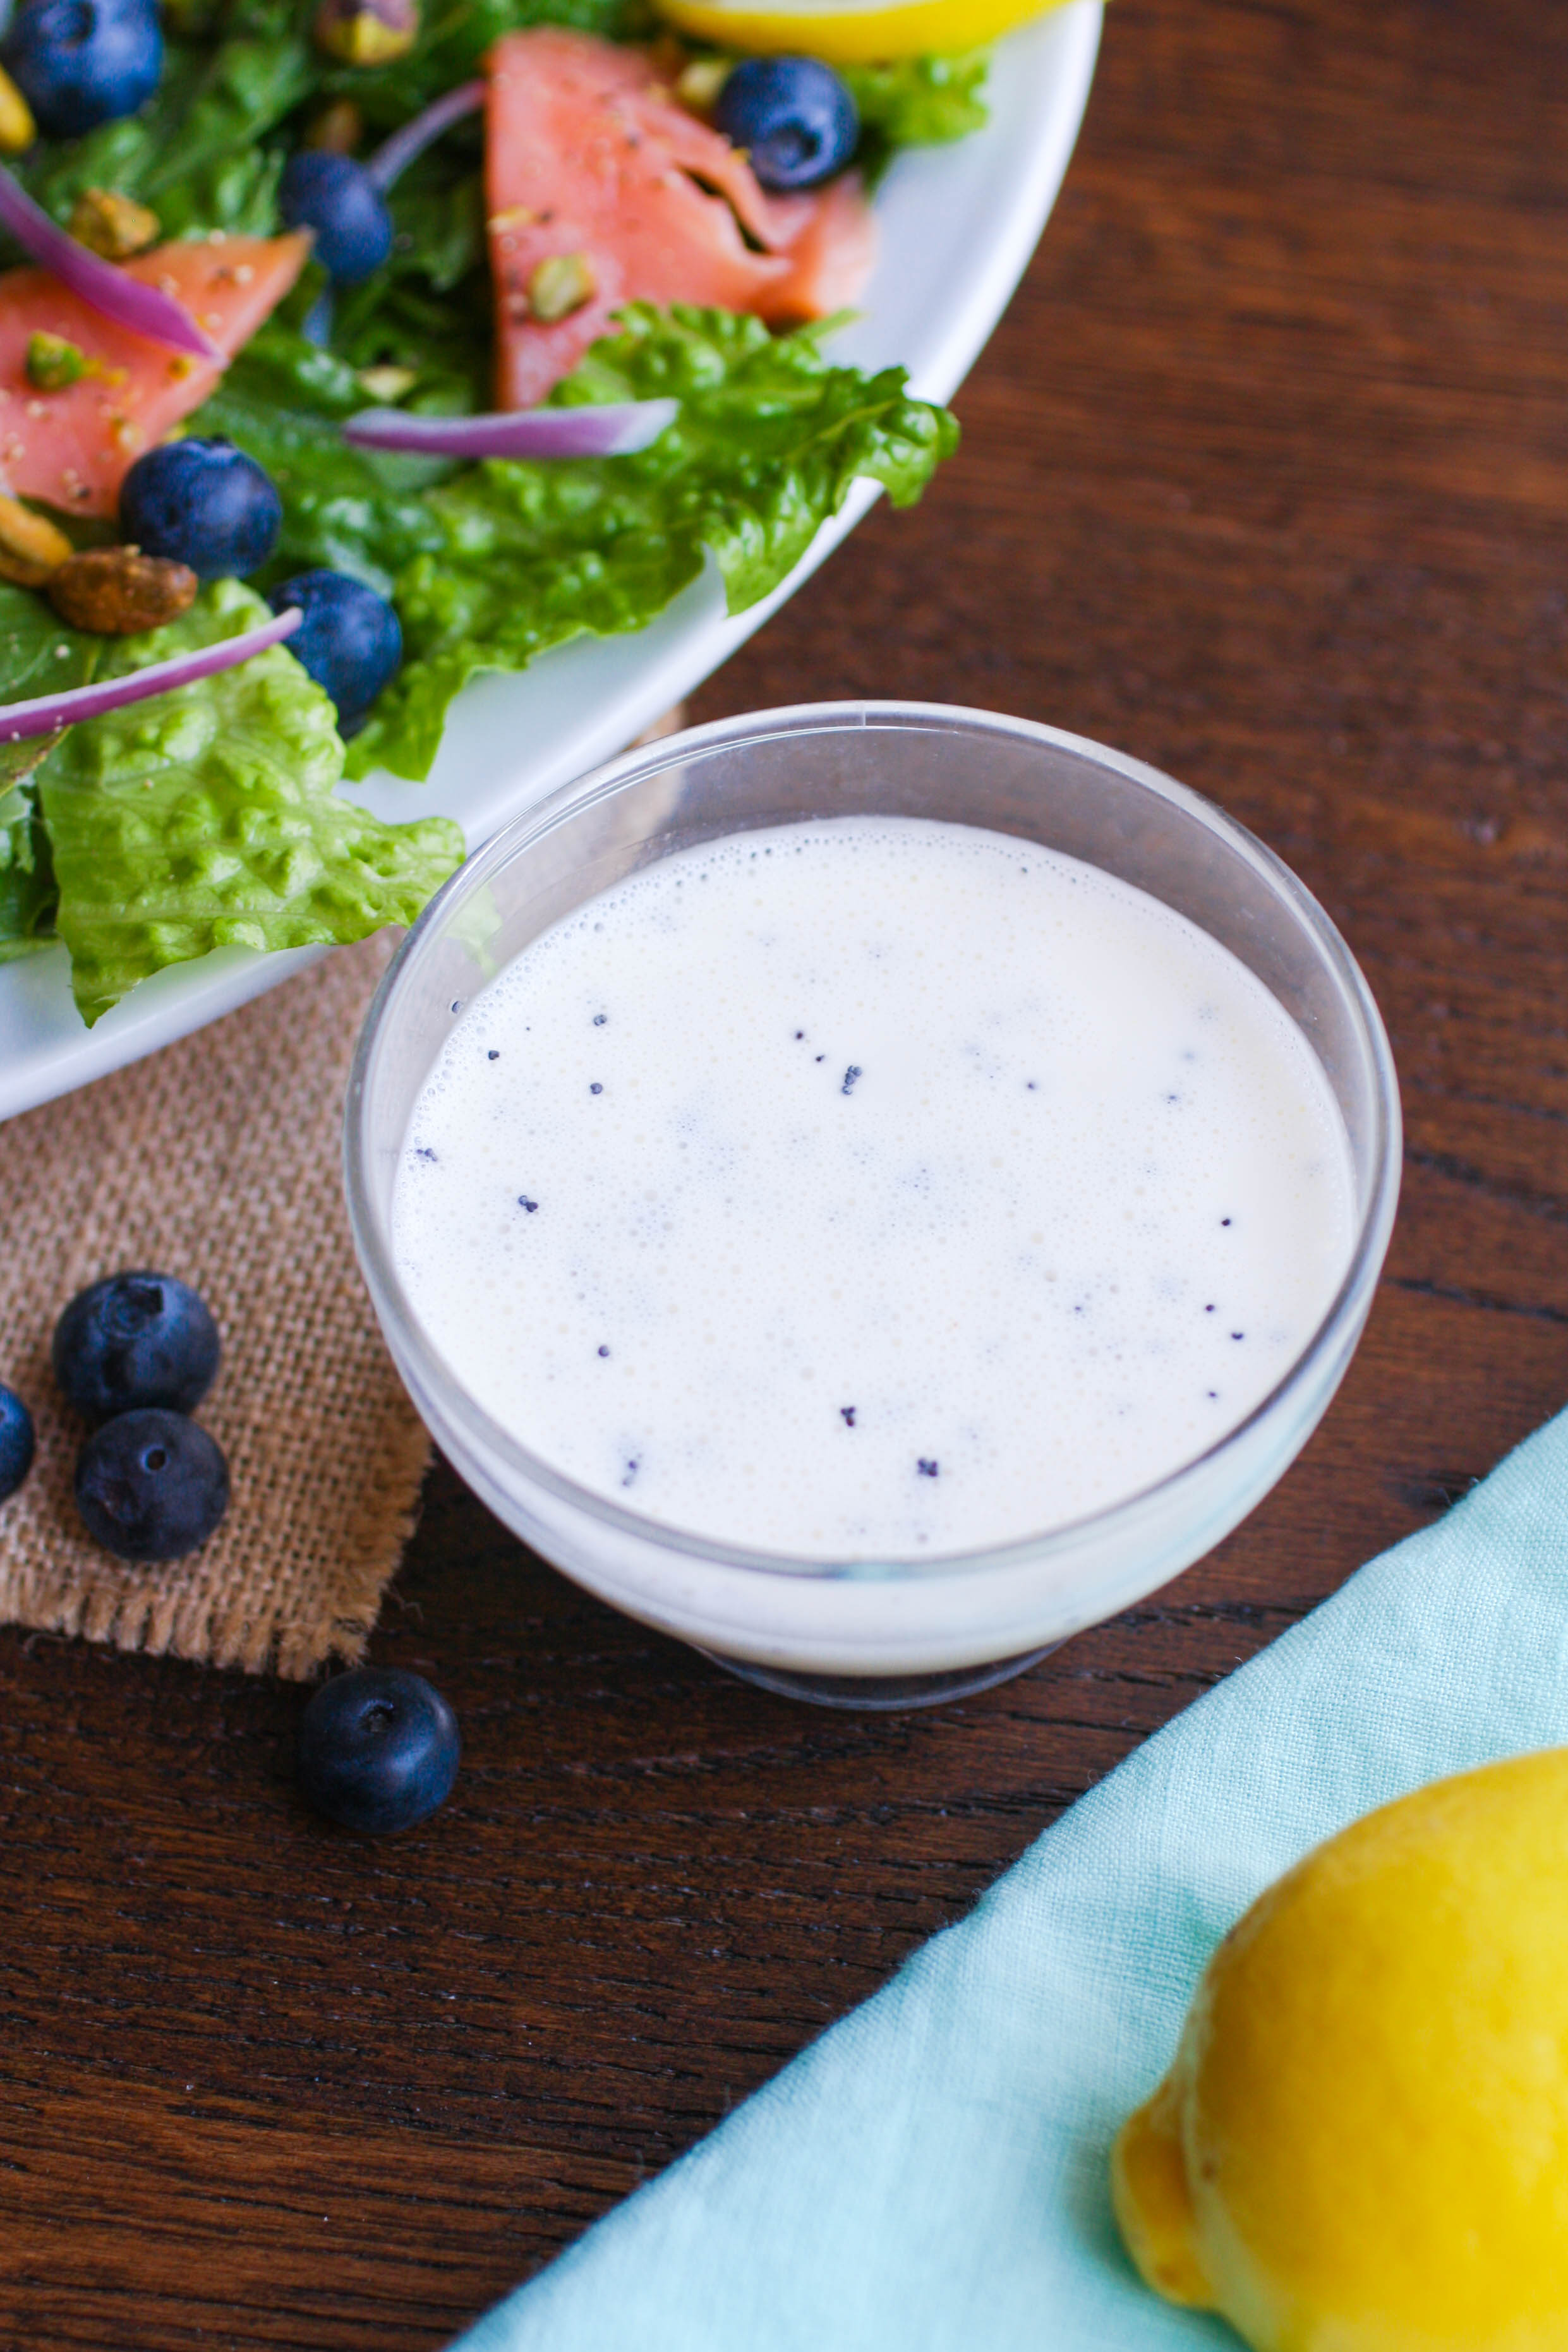 Smoked Salmon Salad with Blueberries and Lemon Poppy Seed Dressing is a fabulous summer dish. You'll love the lemon poppy seed dressing for it's flavor (and because it's so easy to make)!